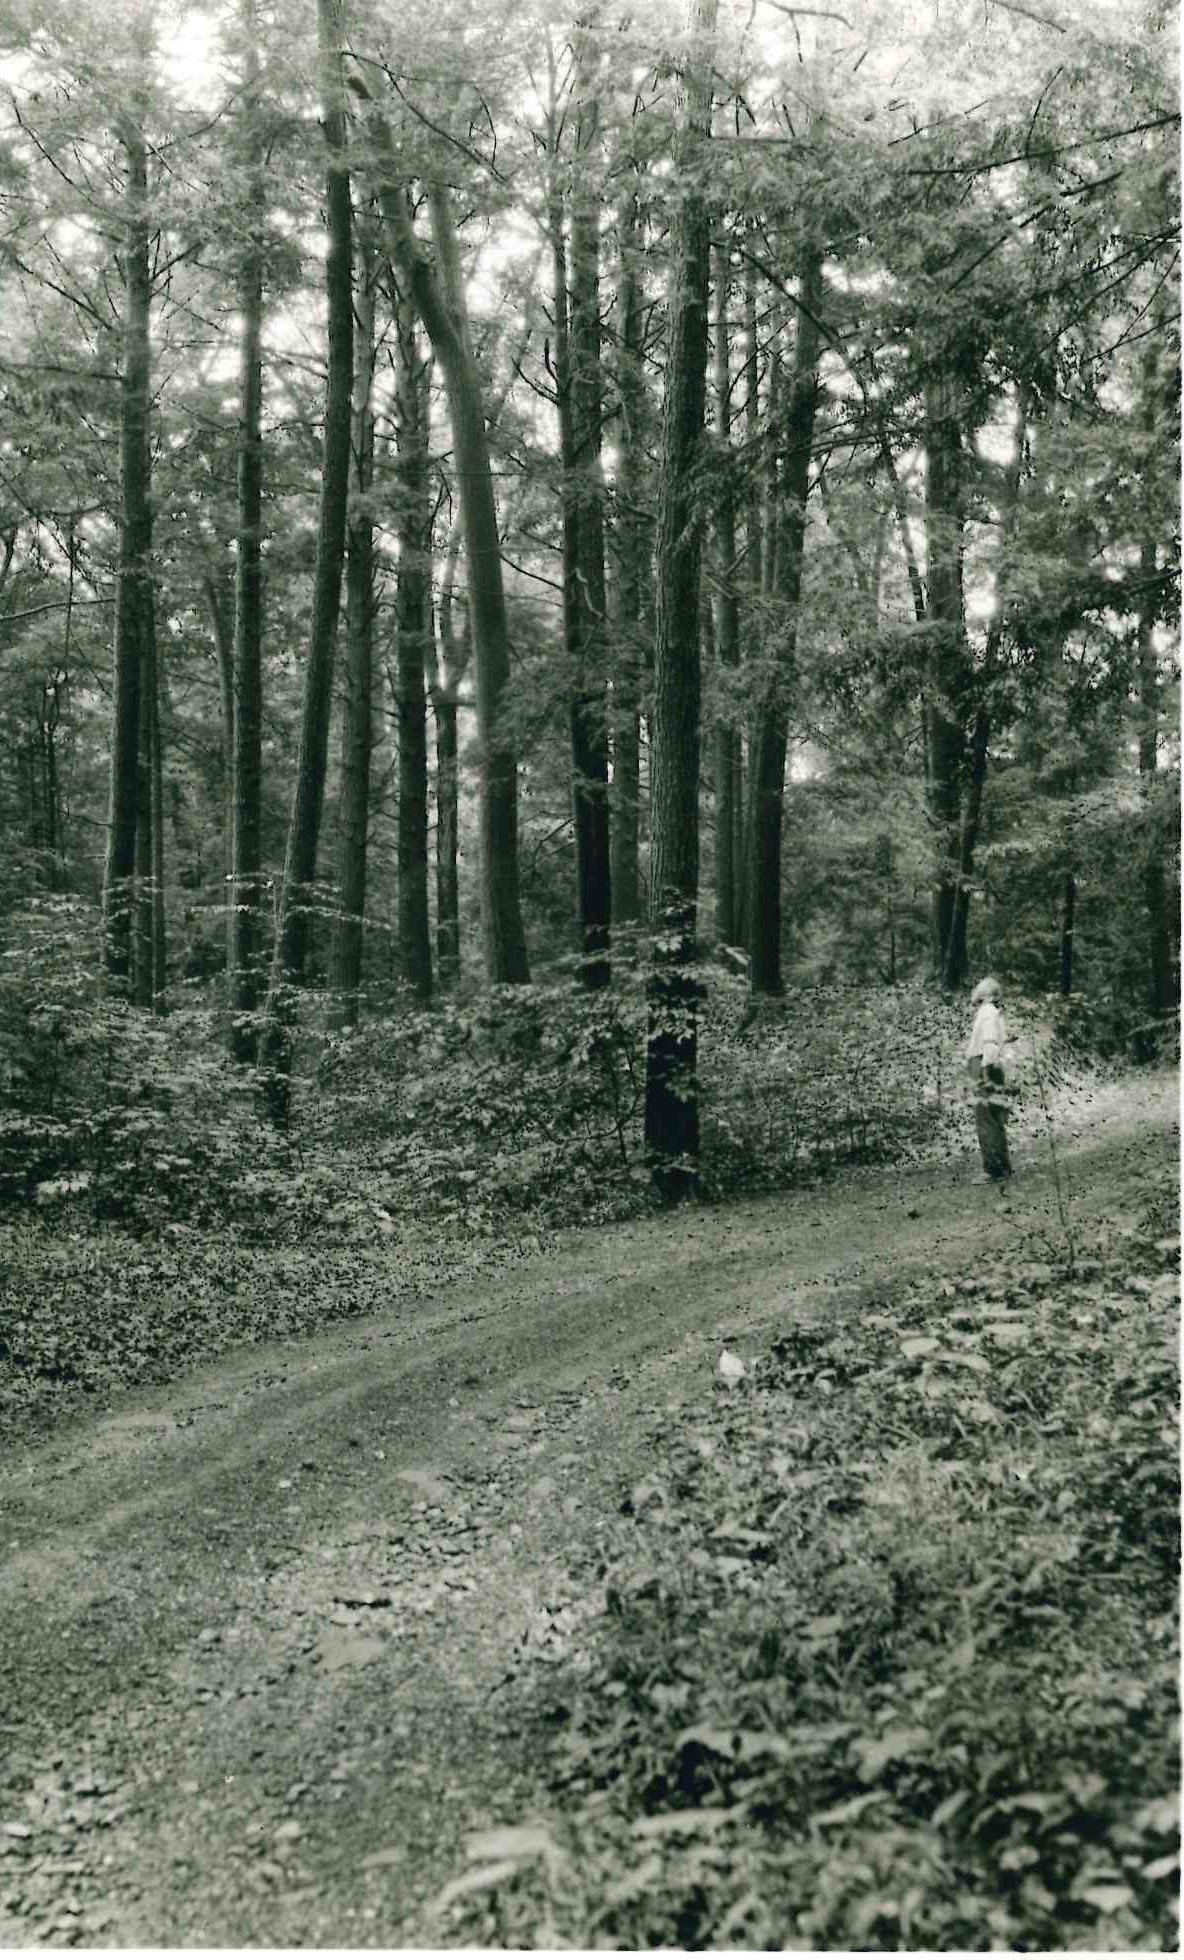 One of the several miles of woods roads which FDR loved to ride on his vacation trips to Hyde Park. 